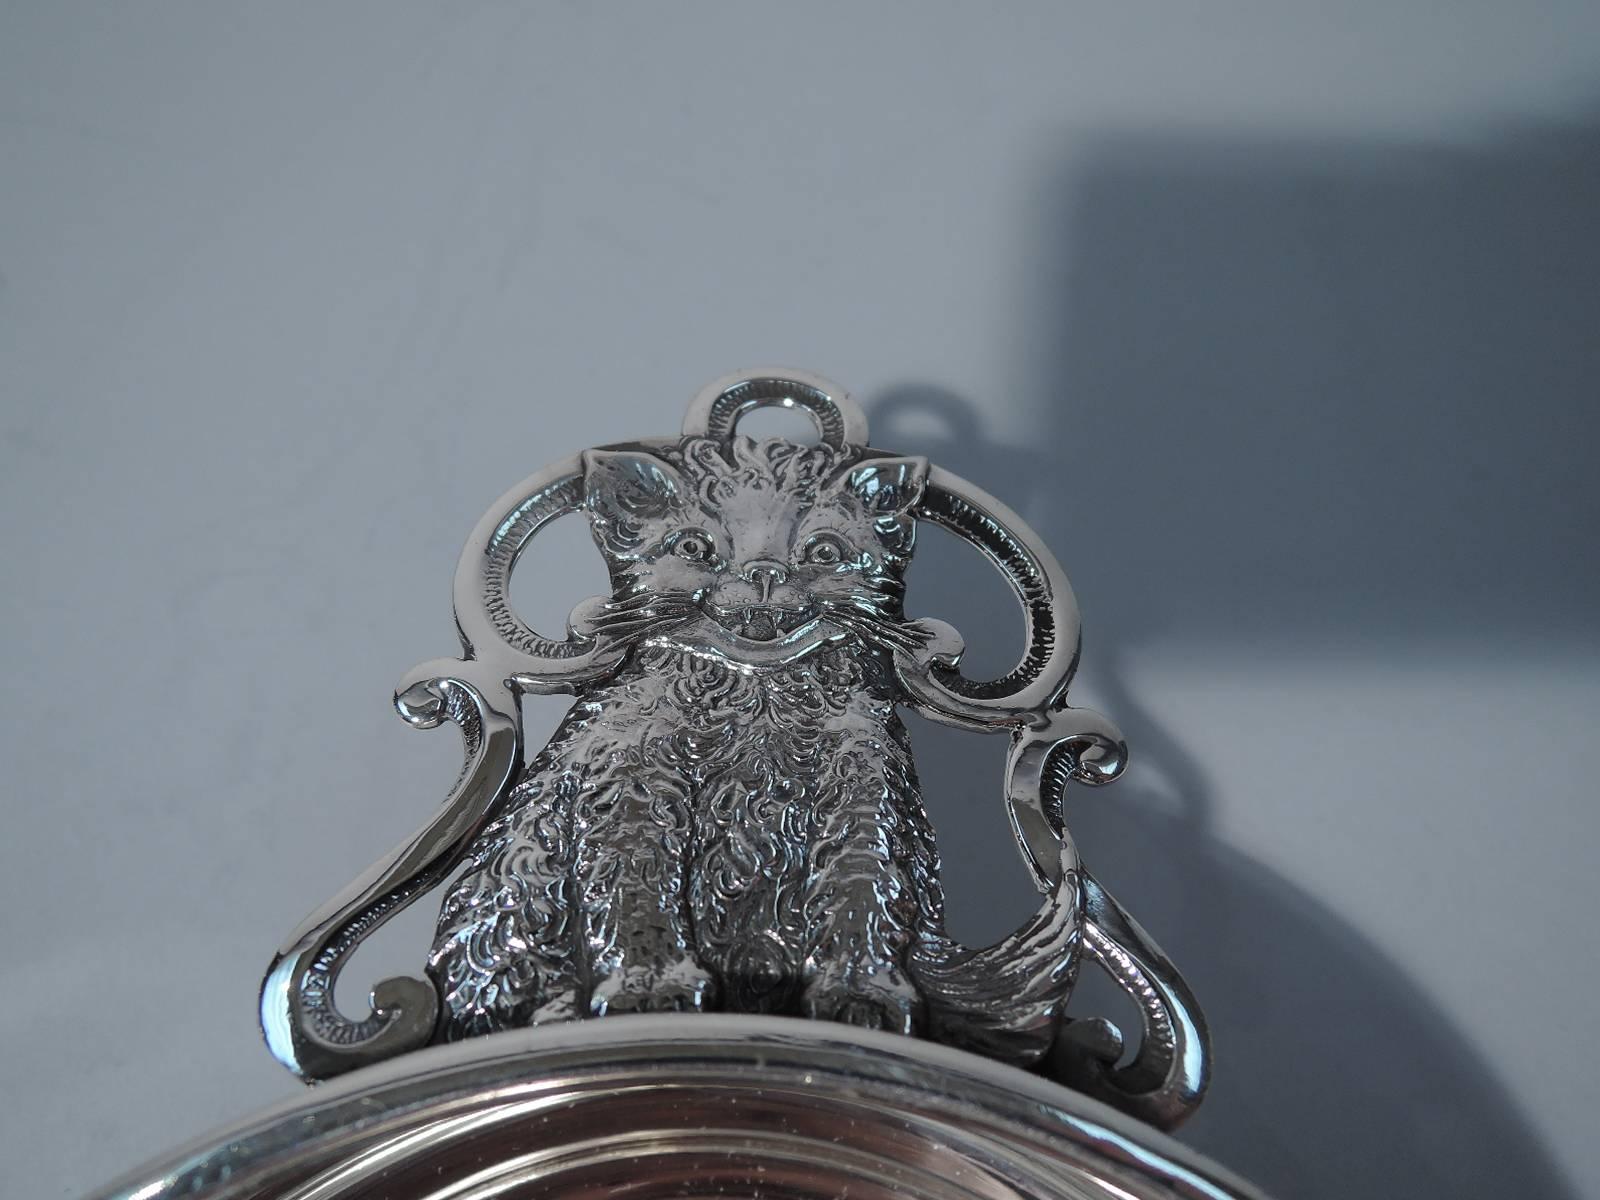 Sterling silver porringer. Made by Richard Dimes in South Boston. Upward tapering sides and flat rim. Open scroll handle inset with furry fluff ball. A great baby gift. Hallmark includes no. 137. Excellent condition.

Dimensions: H 1 3/4 x W 6 5/8